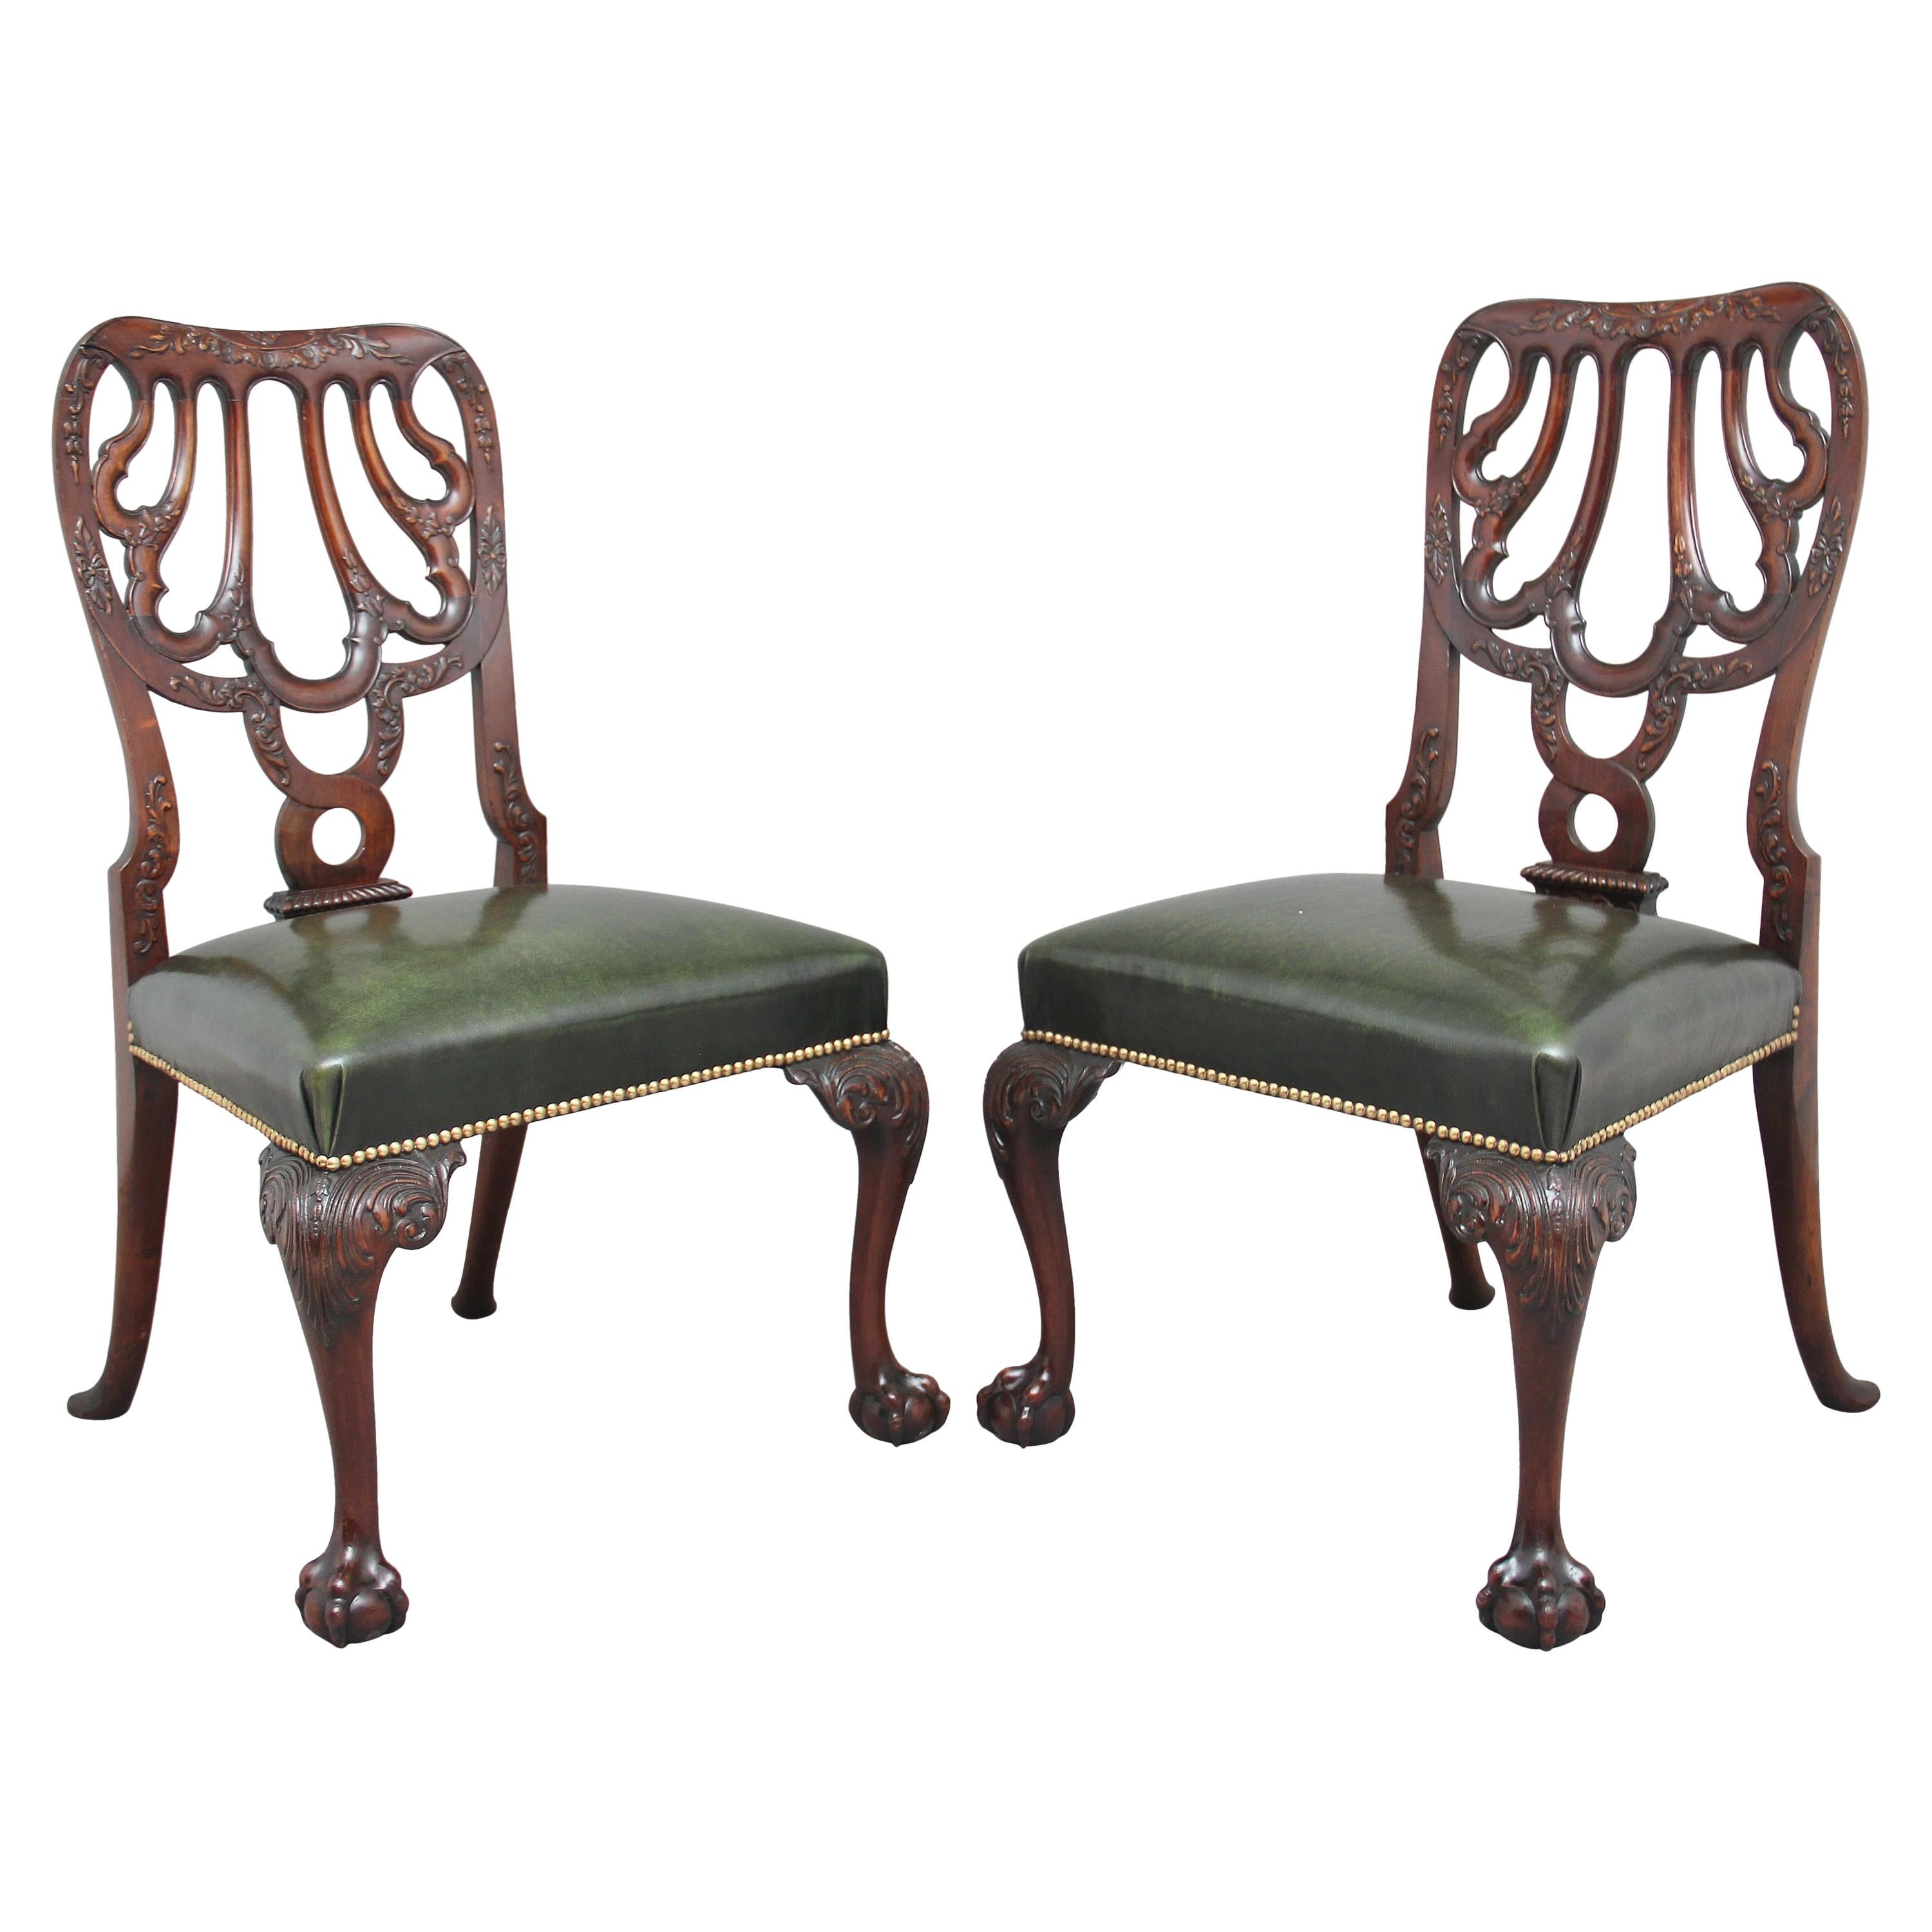 Pair of 19th Century carved mahogany side chairs in the Chippendale style